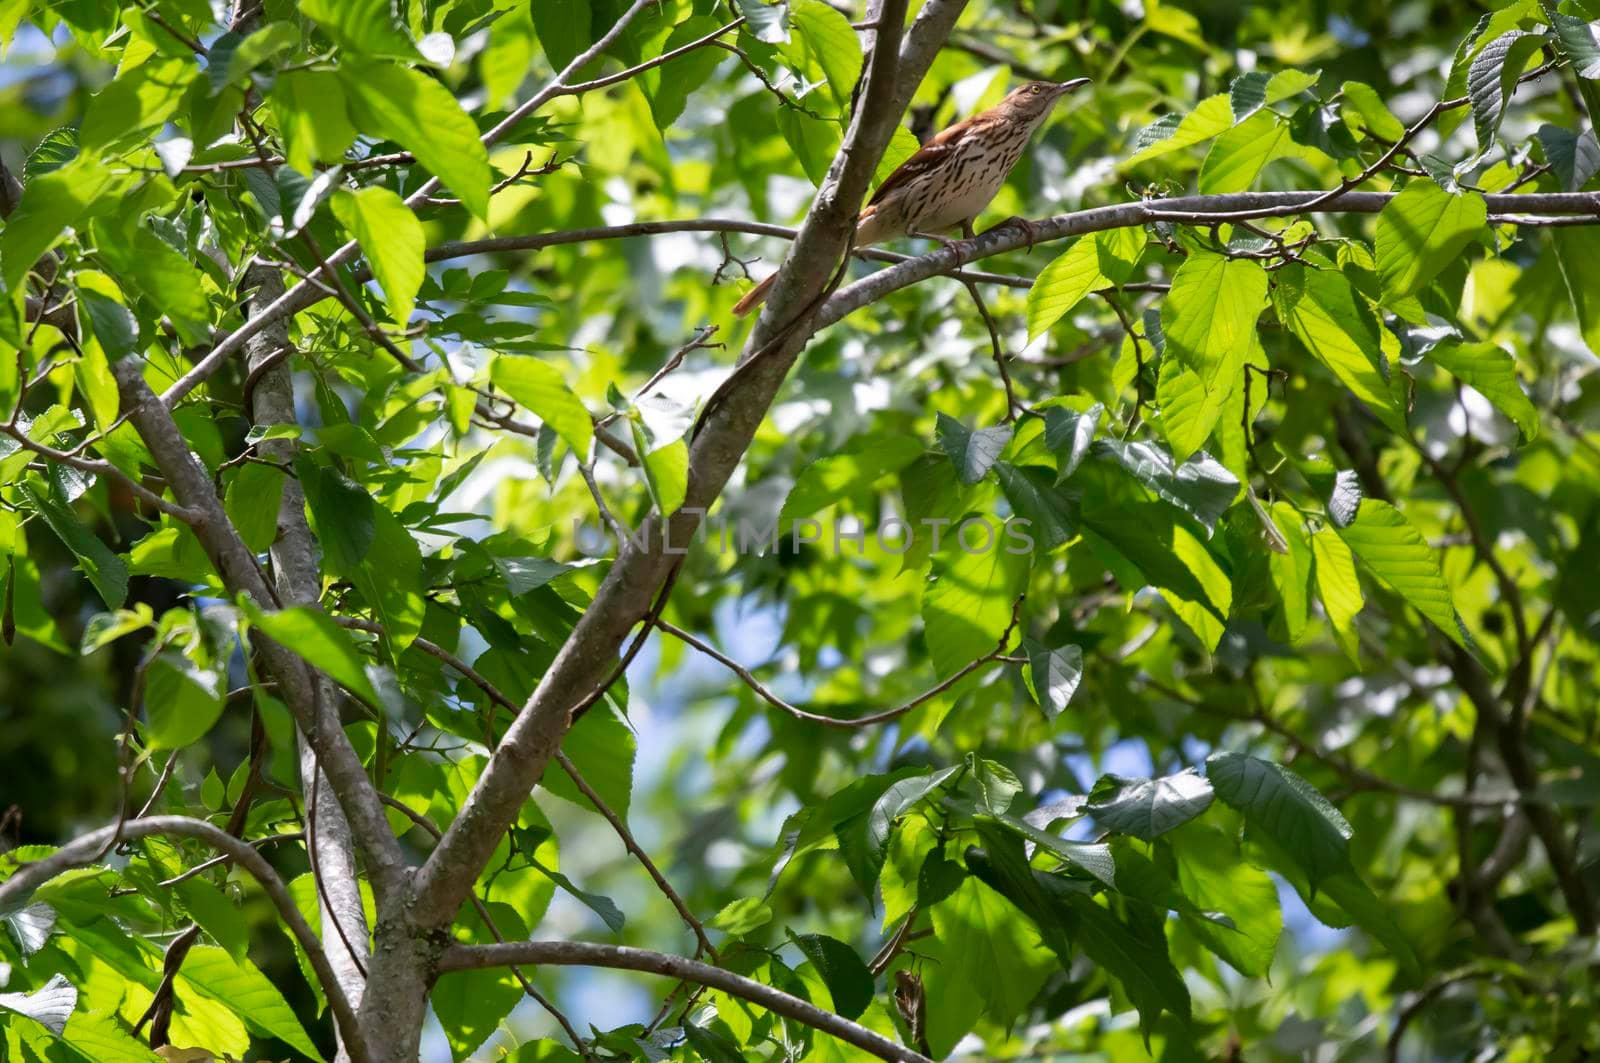 Curious Brown Thrasher on a Tree by tornado98